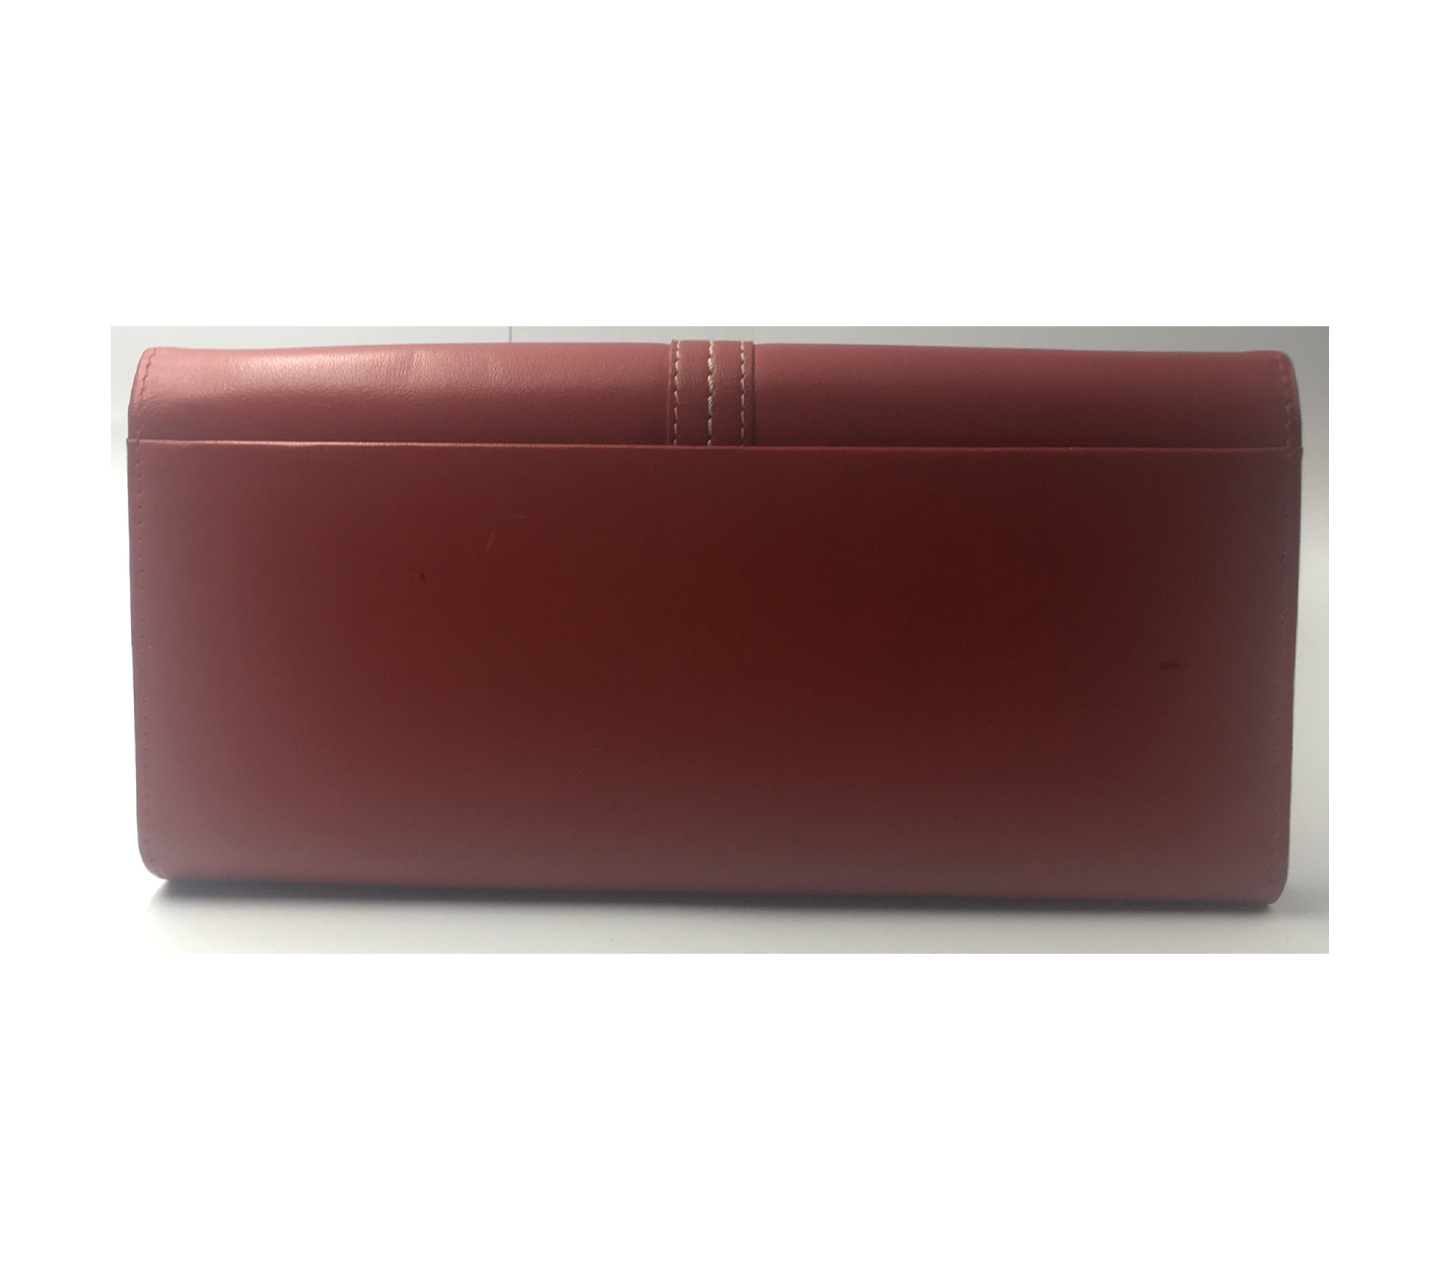 Braun Buffle Red Leather Wallet